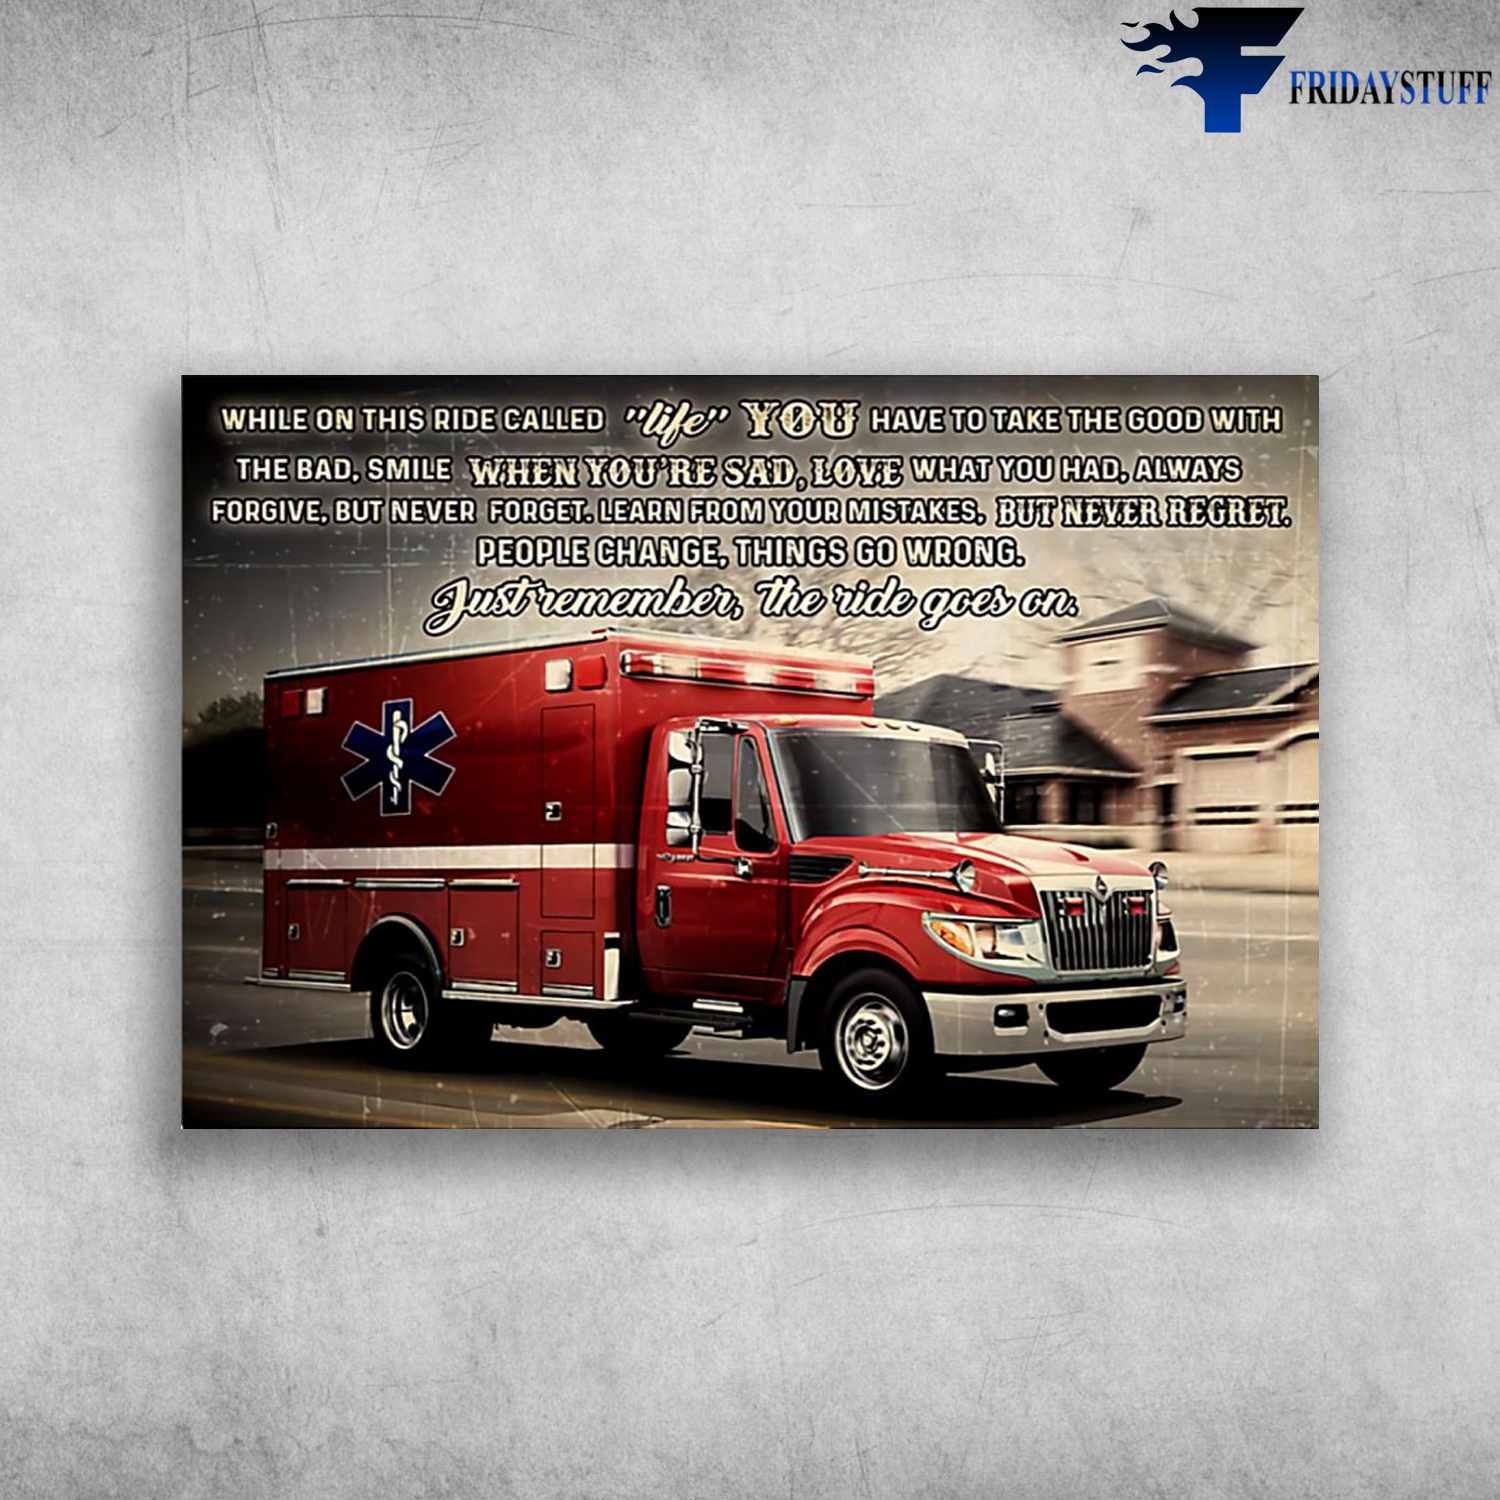 Paramedic, The Ambulance - While On This Called Life, You Have To Take The Good With the Bad